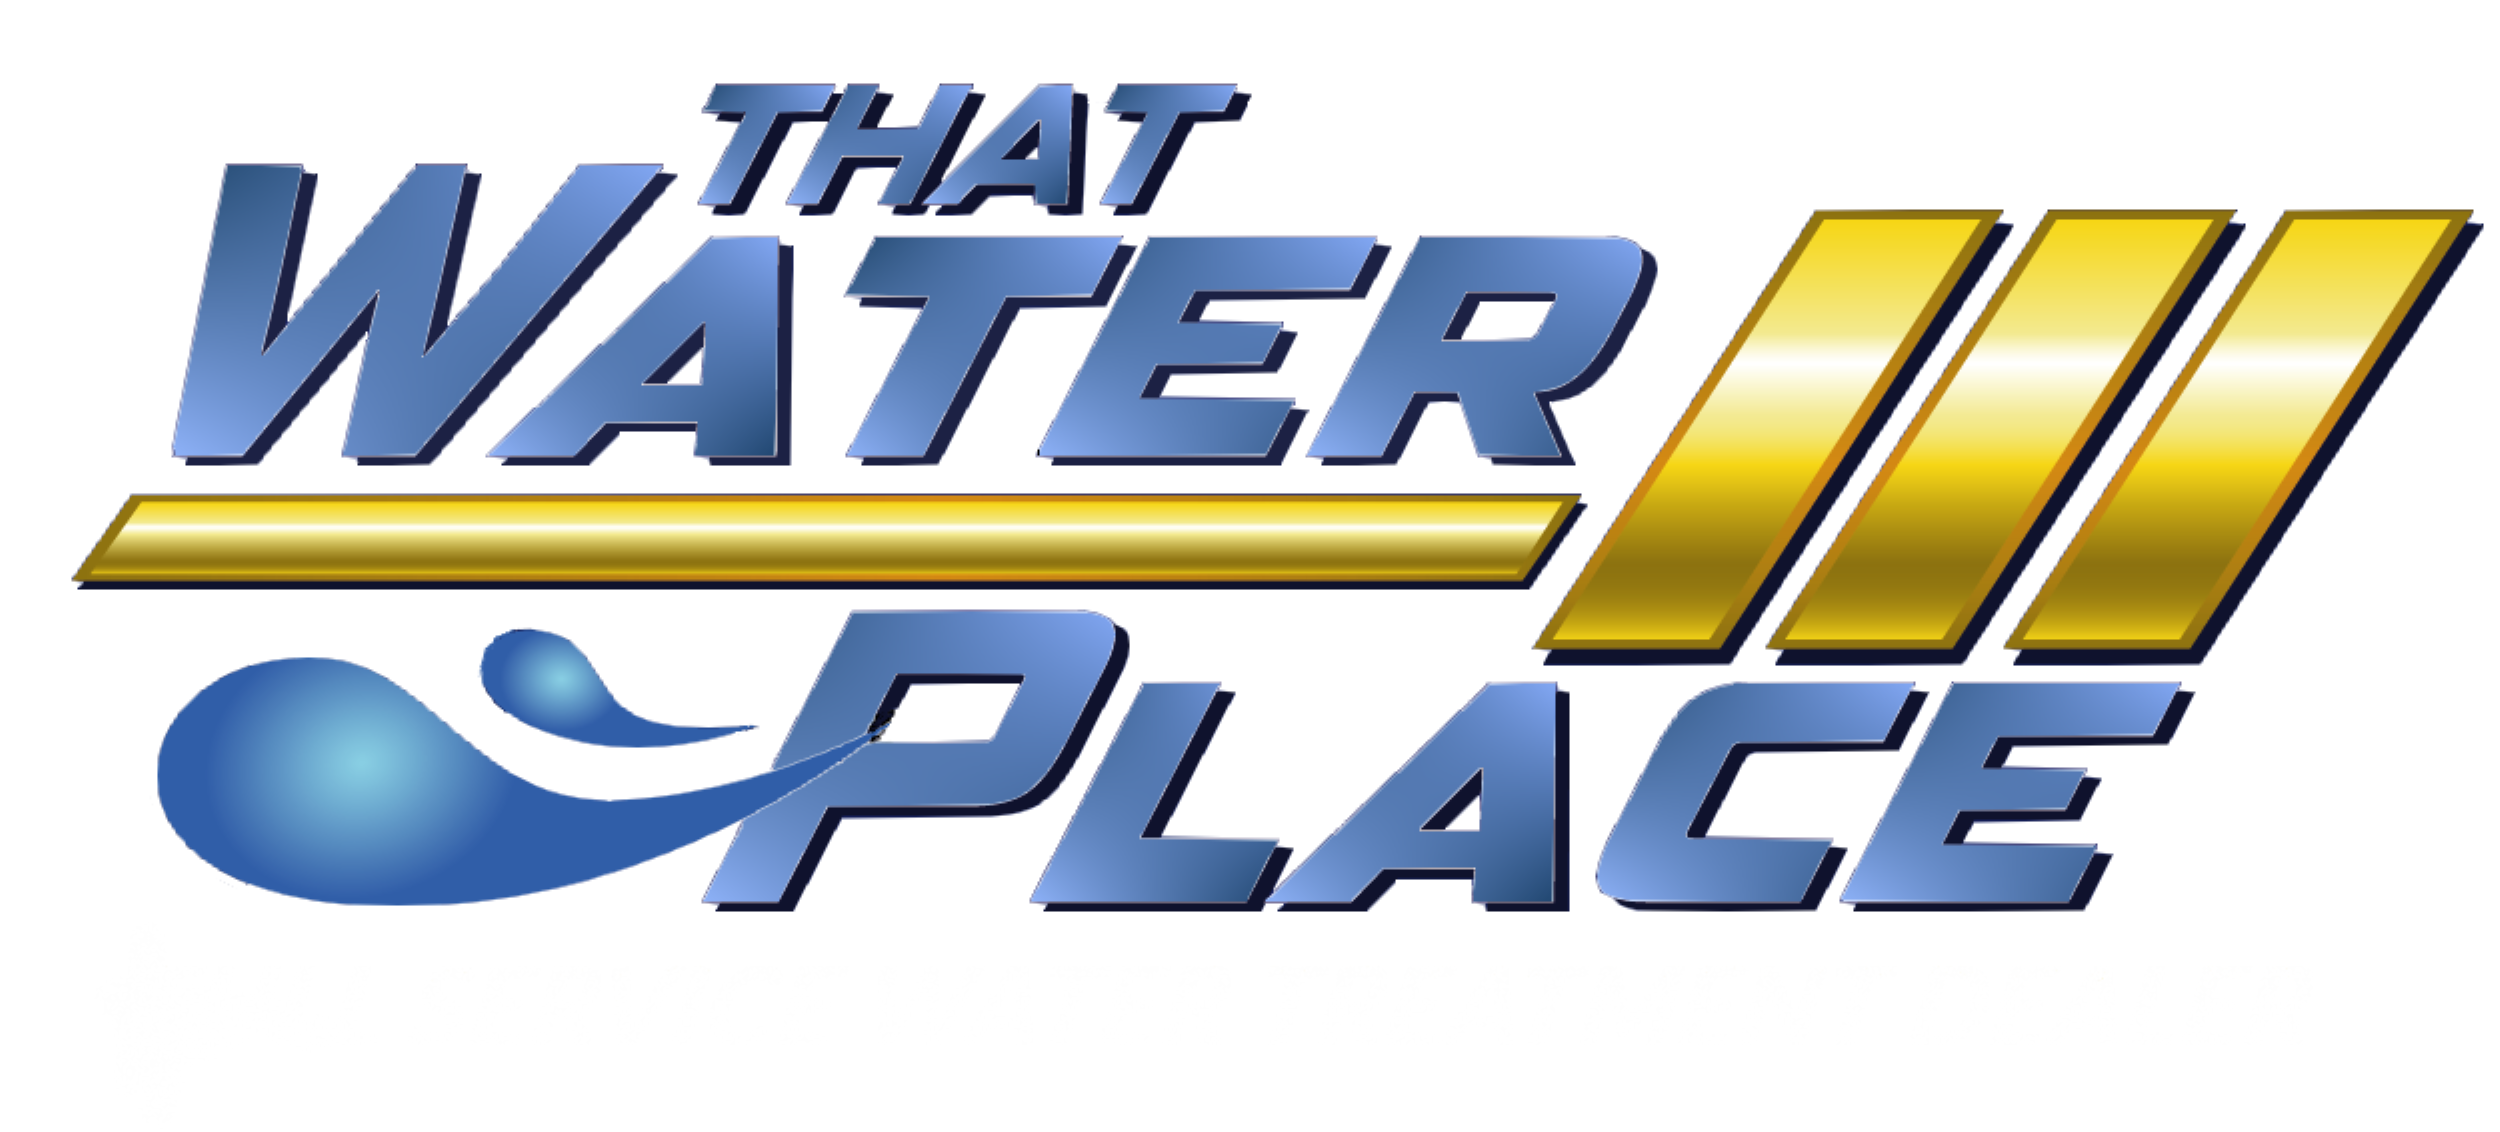 That Water Place Logo